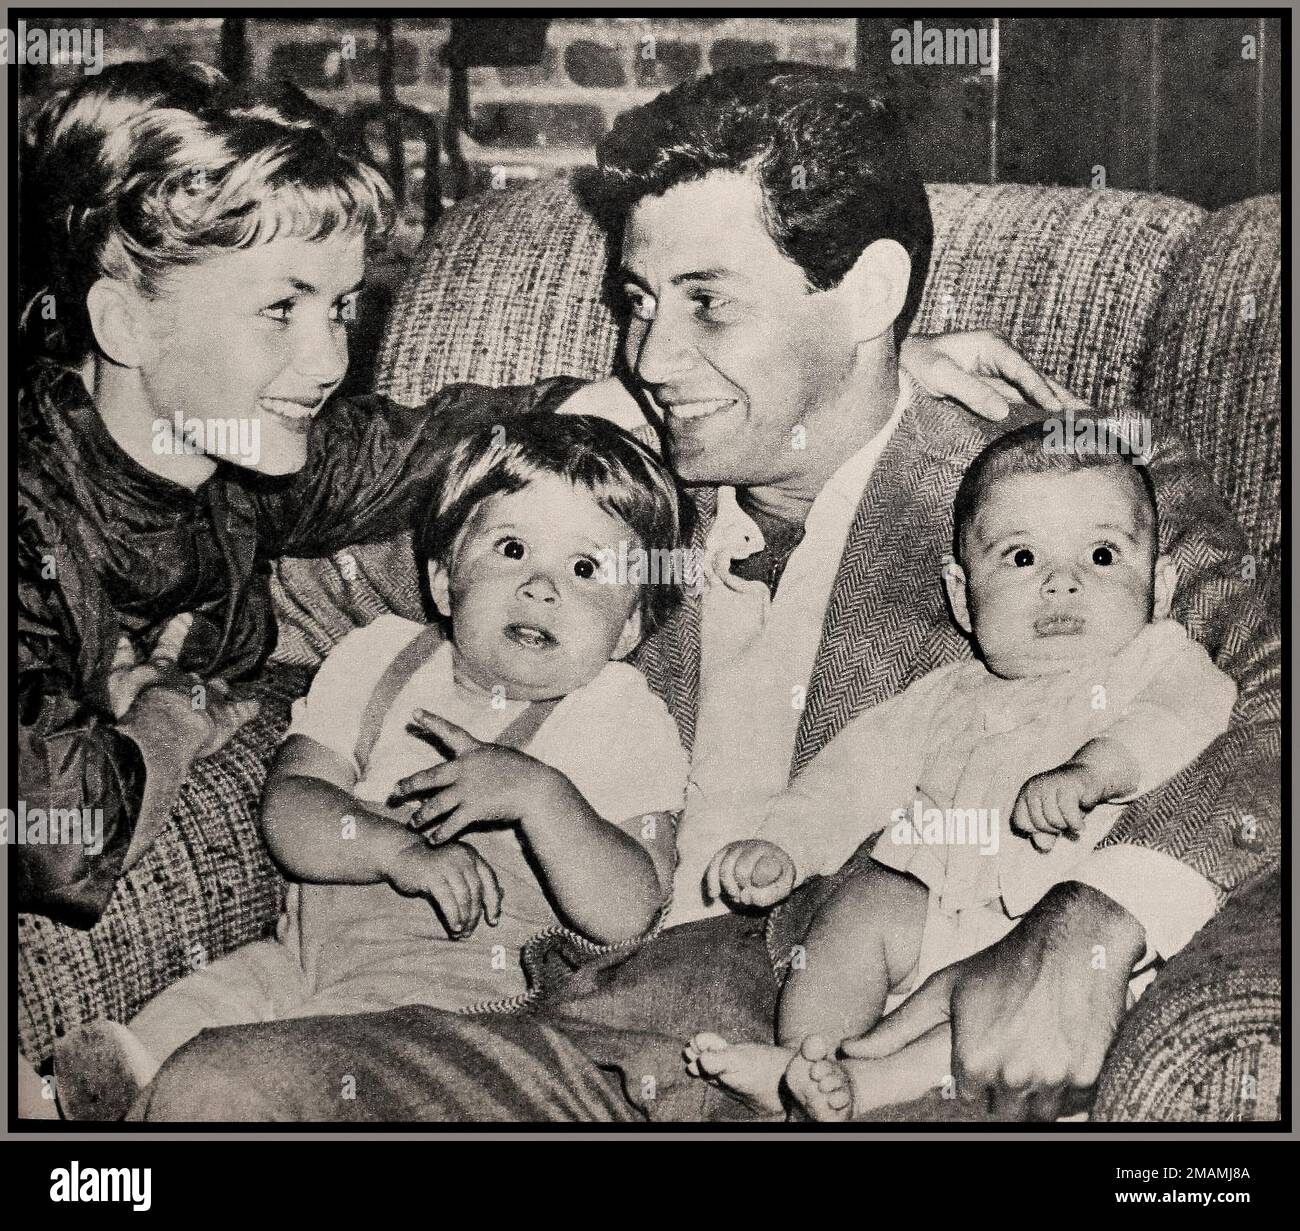 Vintage 1950s Hollywood Press Picture of Debbie Reynolds, Carrie Fisher, Eddie Fisher, and Todd Fisher at home 1958 September 1958  Modern Screen, Hollywood USA Stock Photo